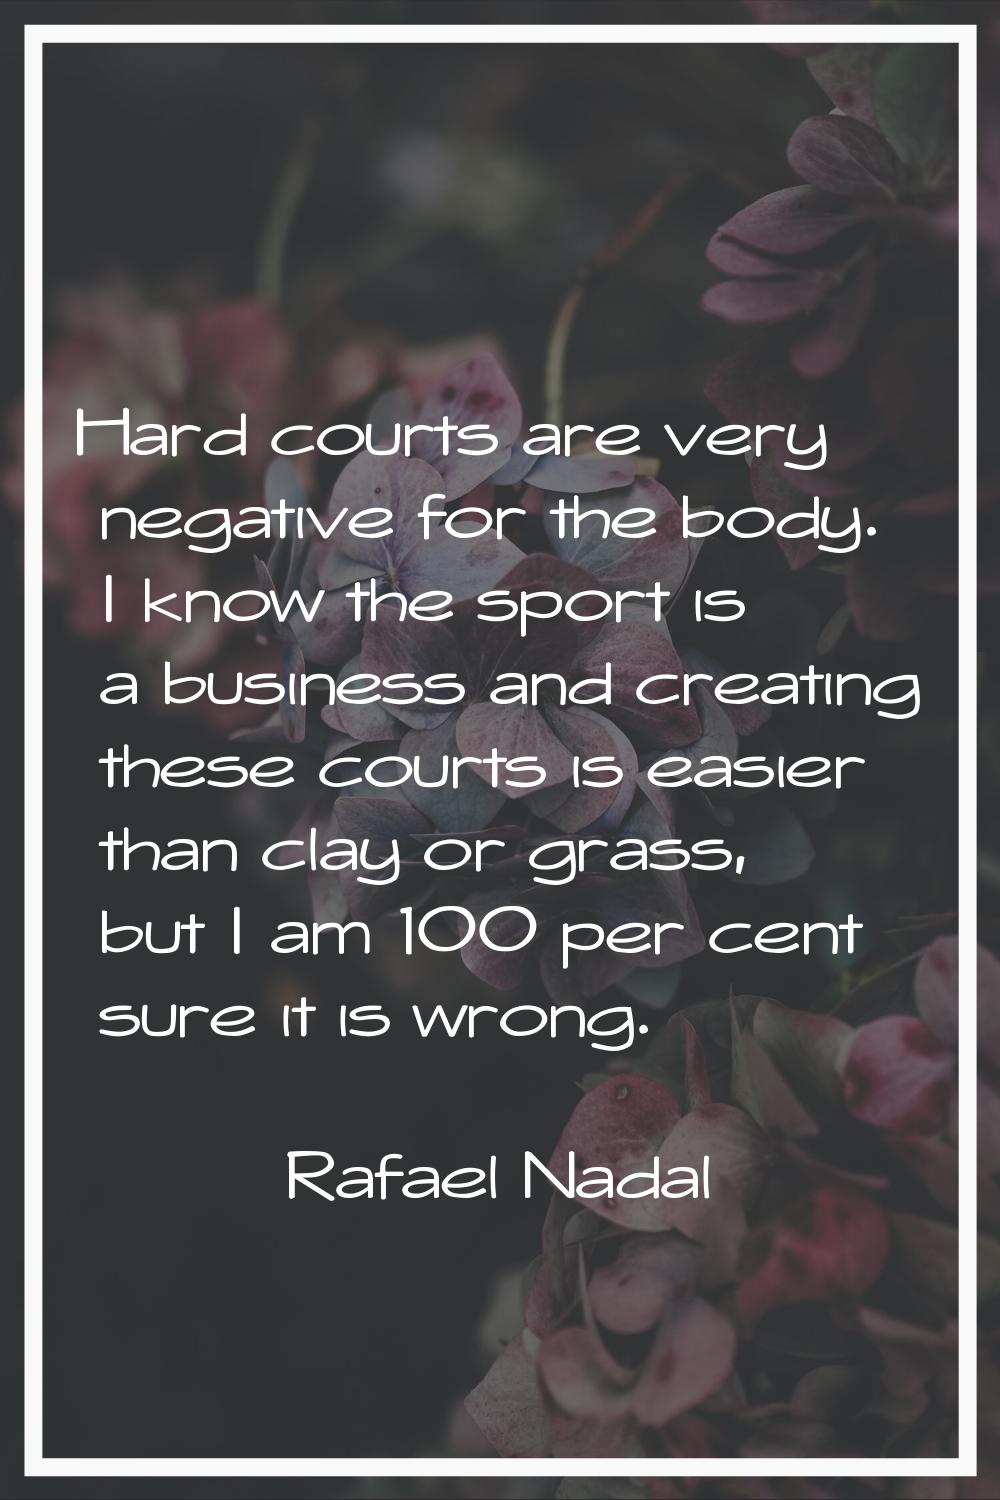 Hard courts are very negative for the body. I know the sport is a business and creating these court